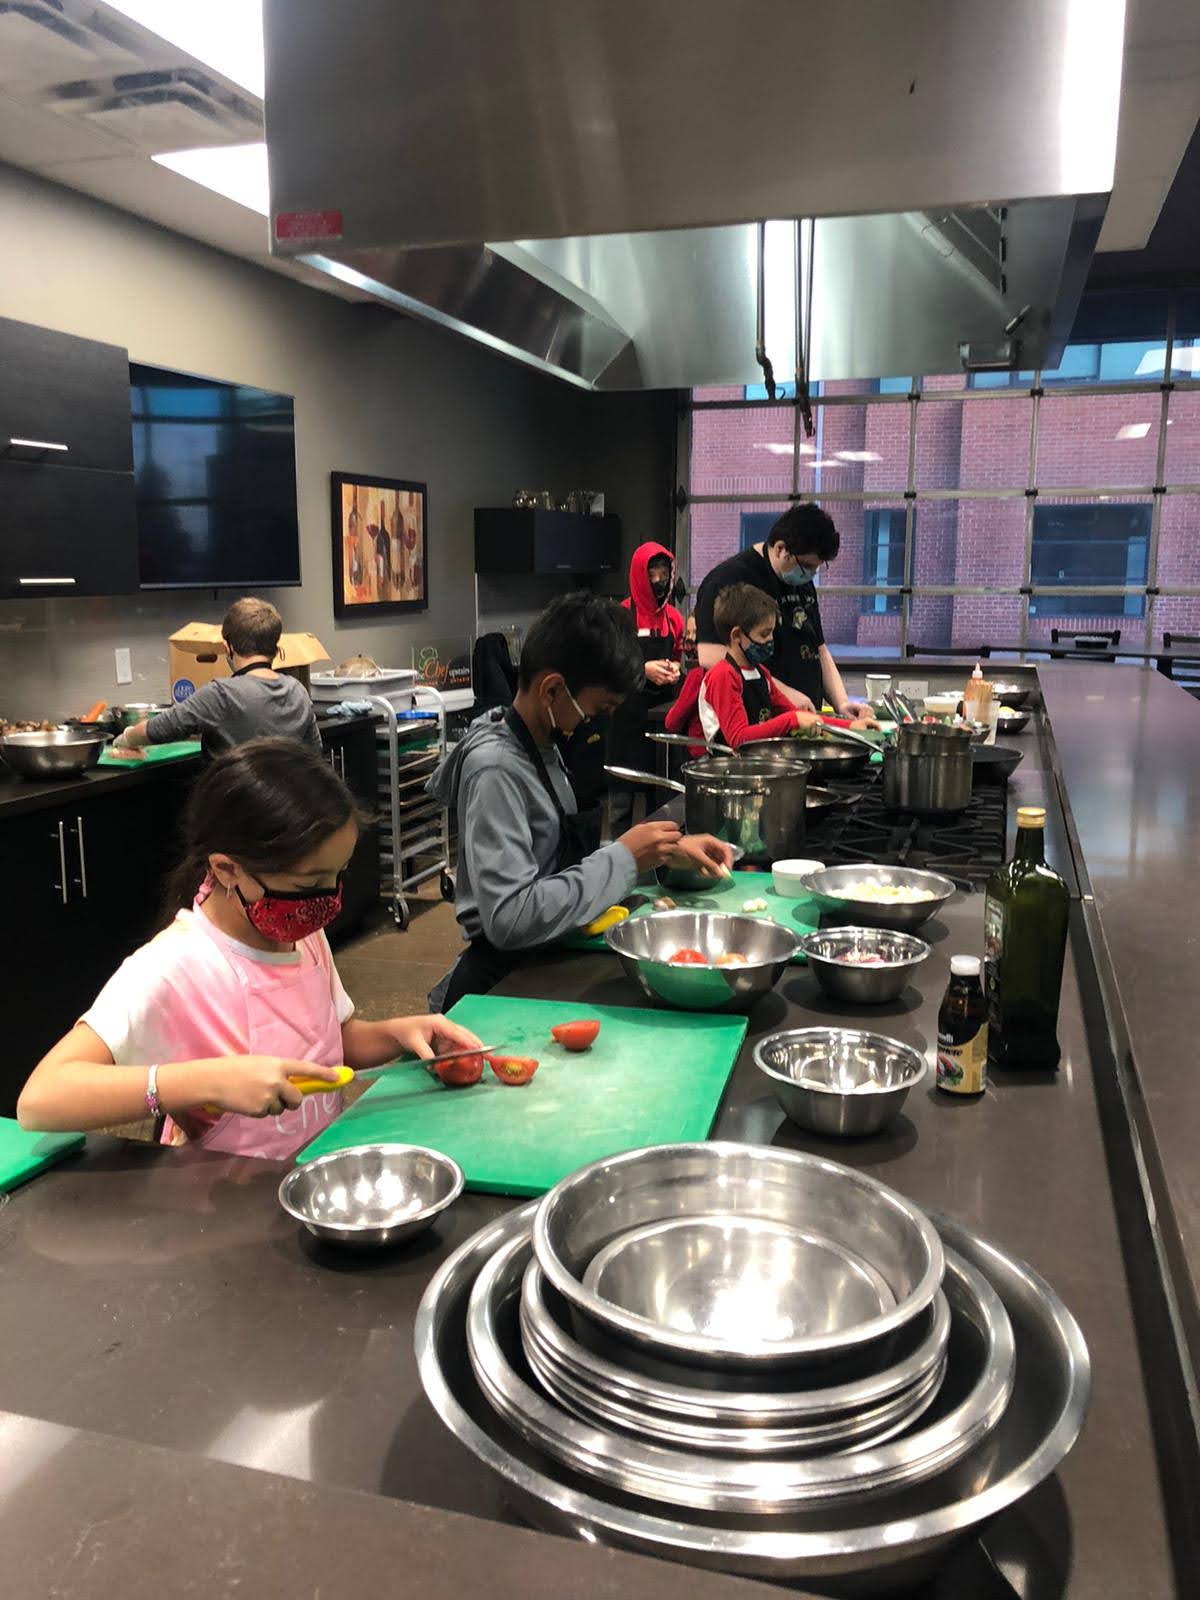 Vaughan - Teen Cooking Classes - 4-week Session from Monday October 18 - Monday November 8